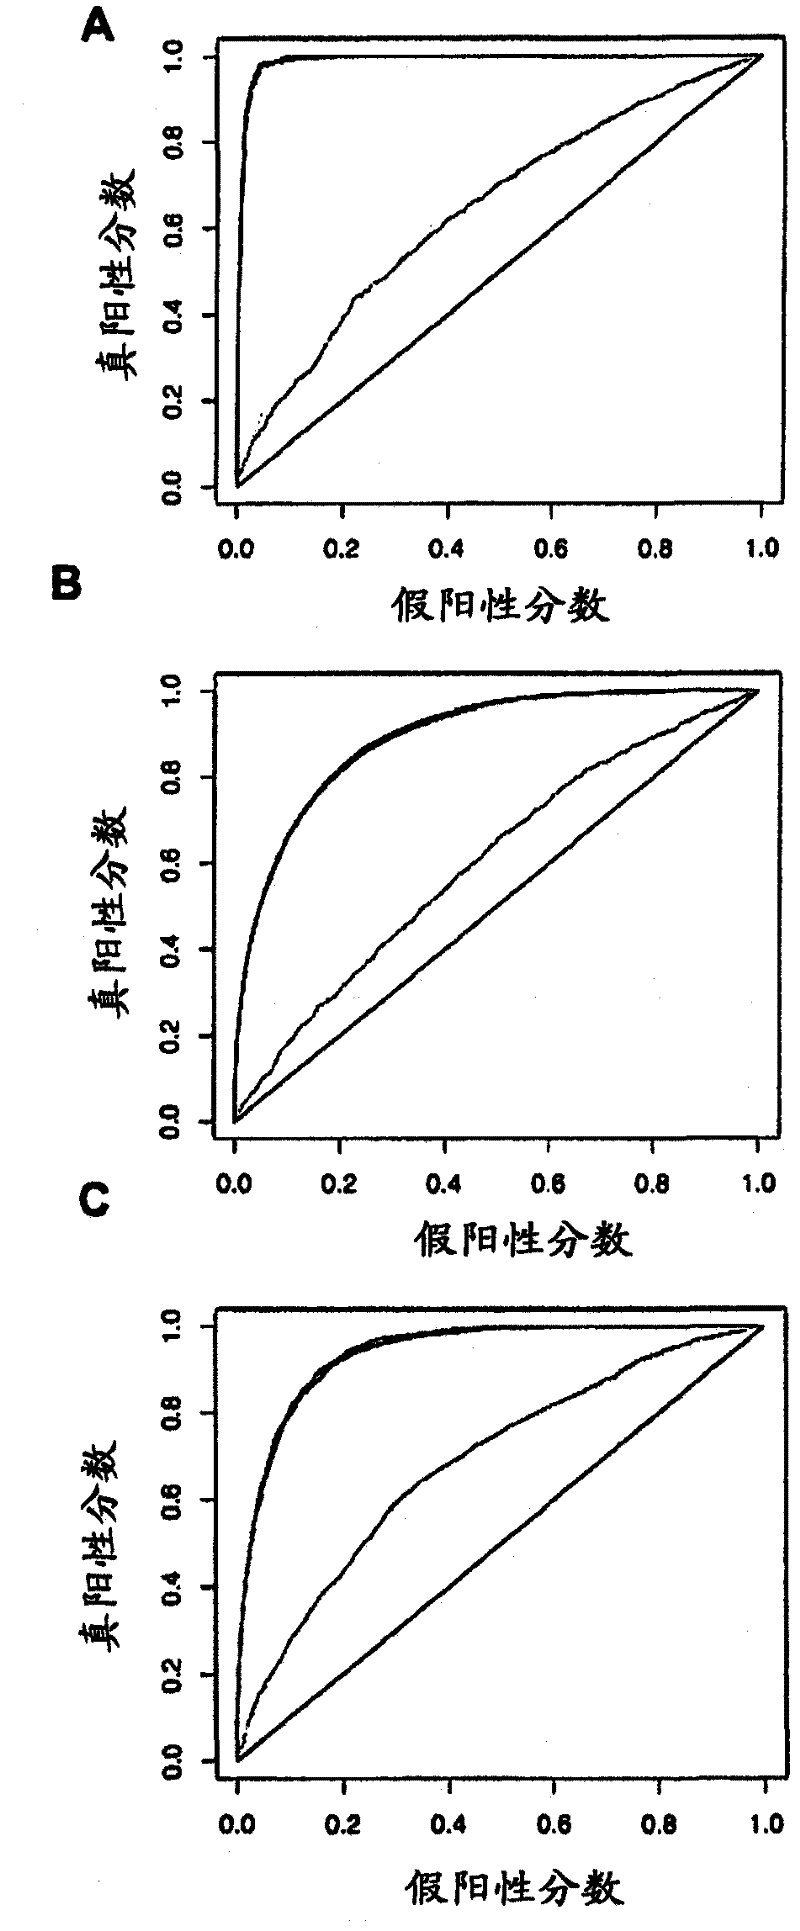 Methods and systems for incorporating multiple environmental and genetic risk factors